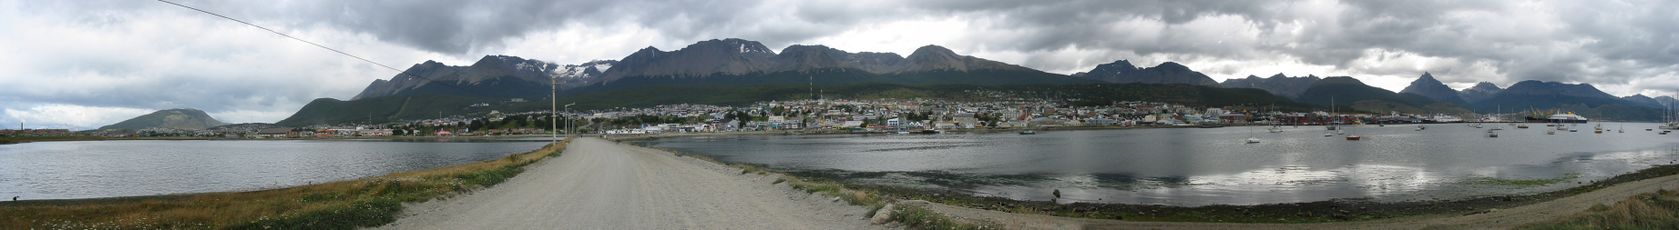 A small city across a gray waterway under lowering gray clouds. A road leads to the city across a causeway. Mountains with snow and a low treeline form the backdrop. A few boats are in the water.